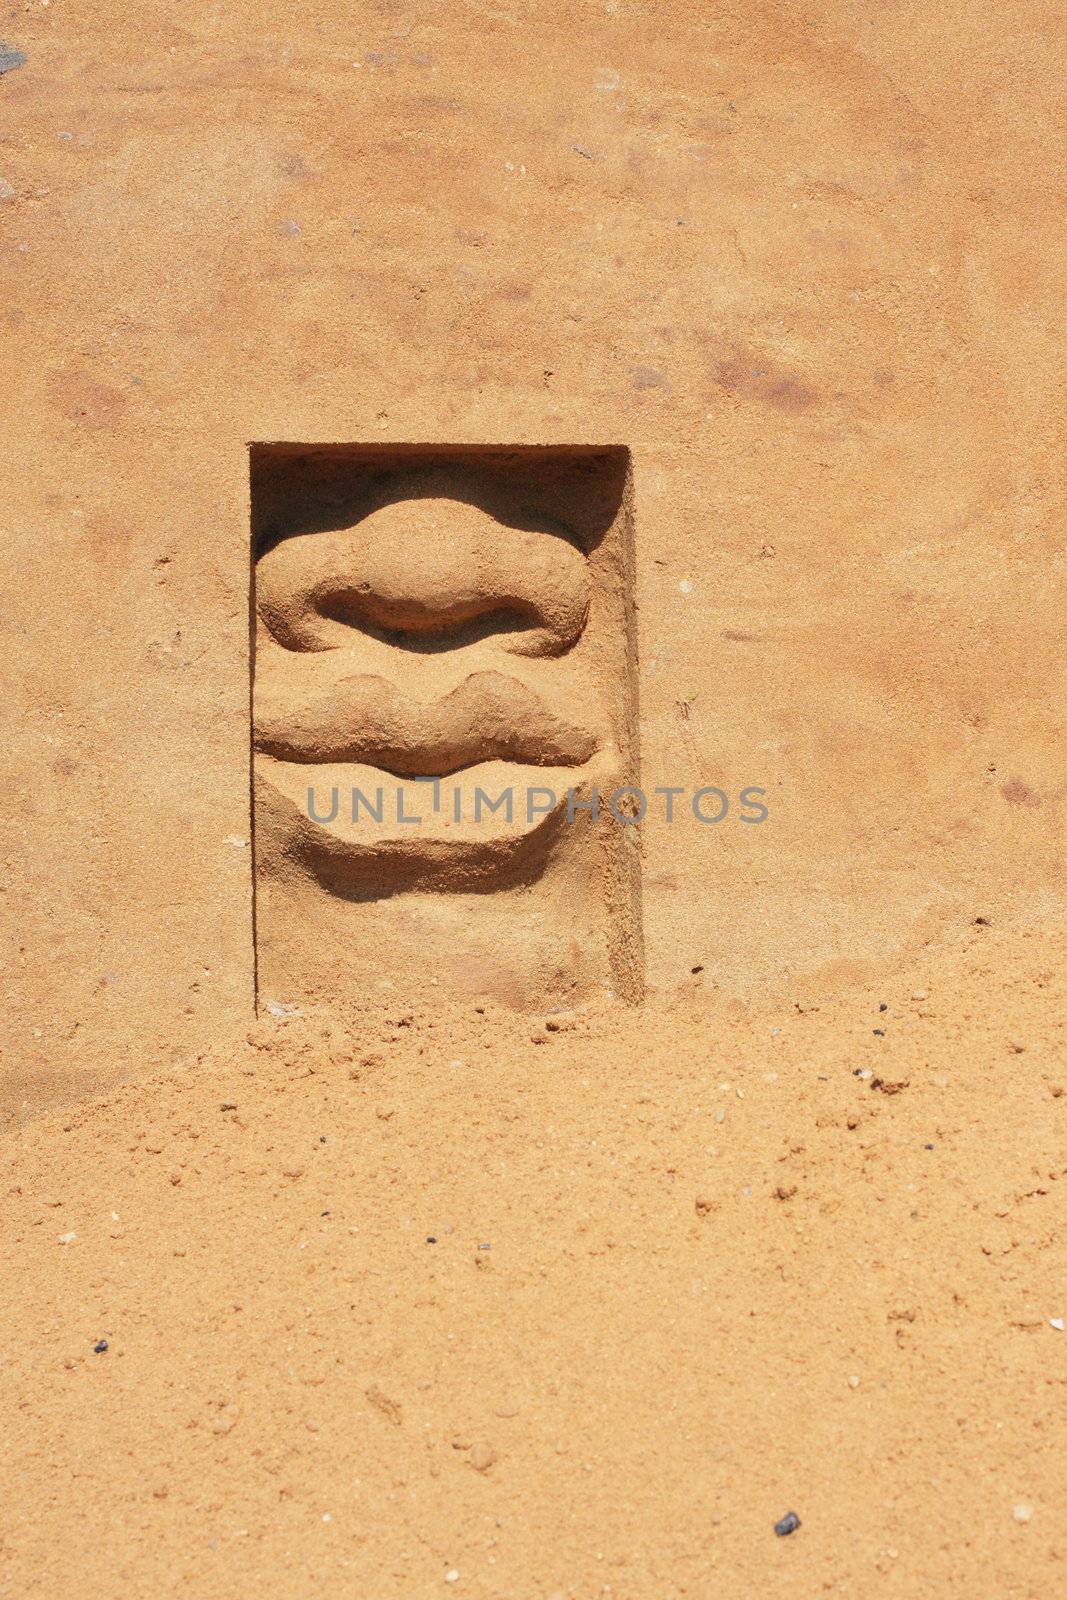 Sculpture, sand, person, an exhibition, product, art, image